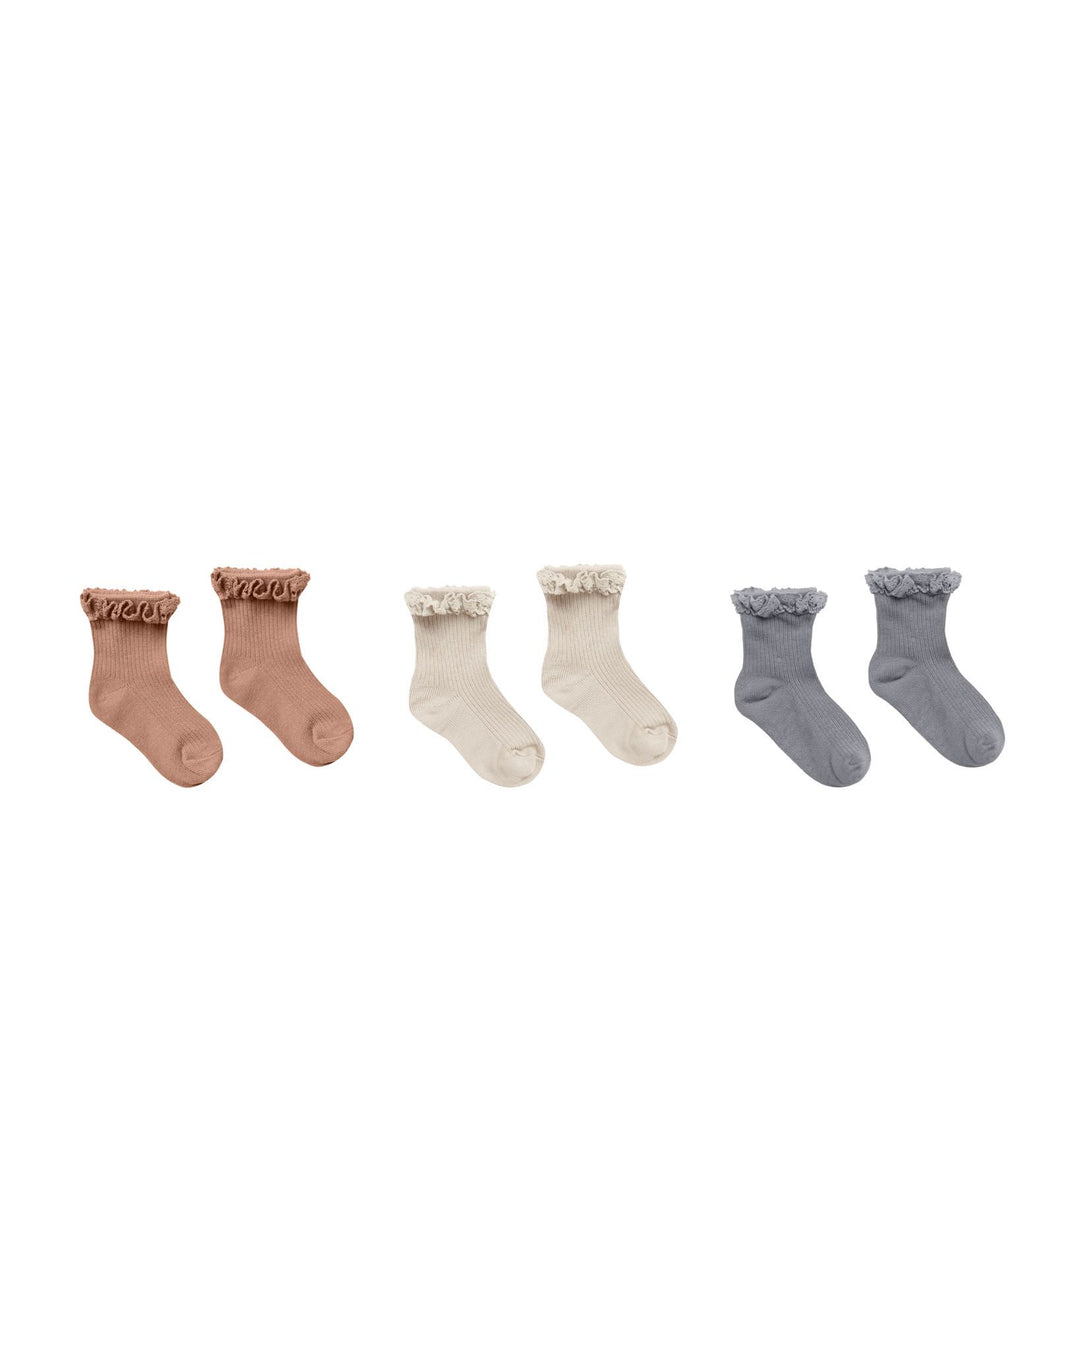 Lace Trim Socks Spice/Natural/Dusty